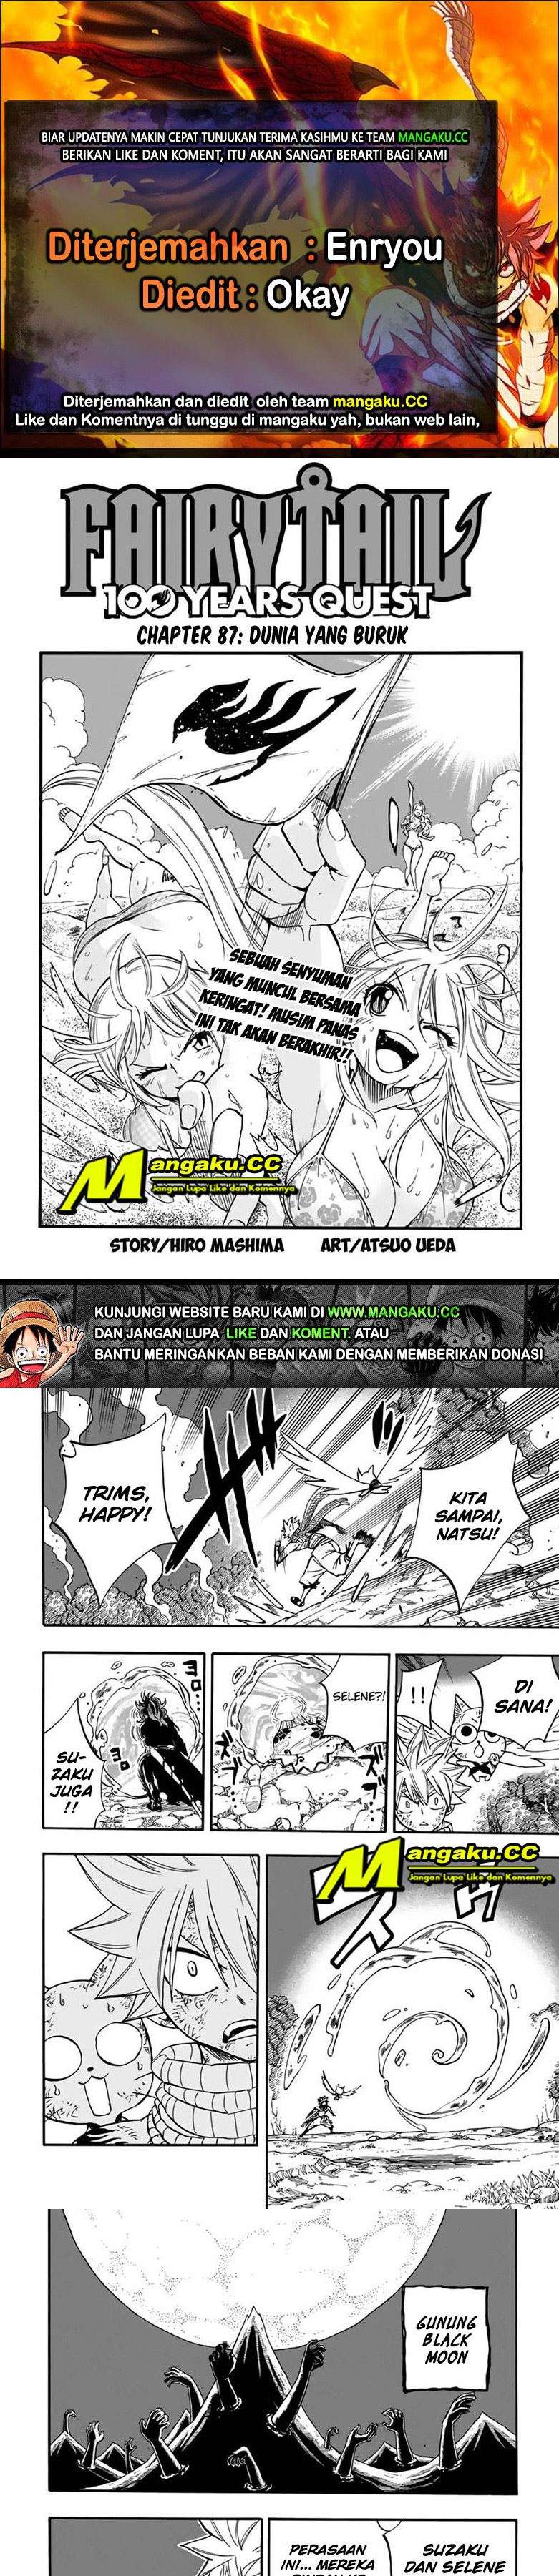 Fairy Tail: 100 Years Quest Chapter 87 1